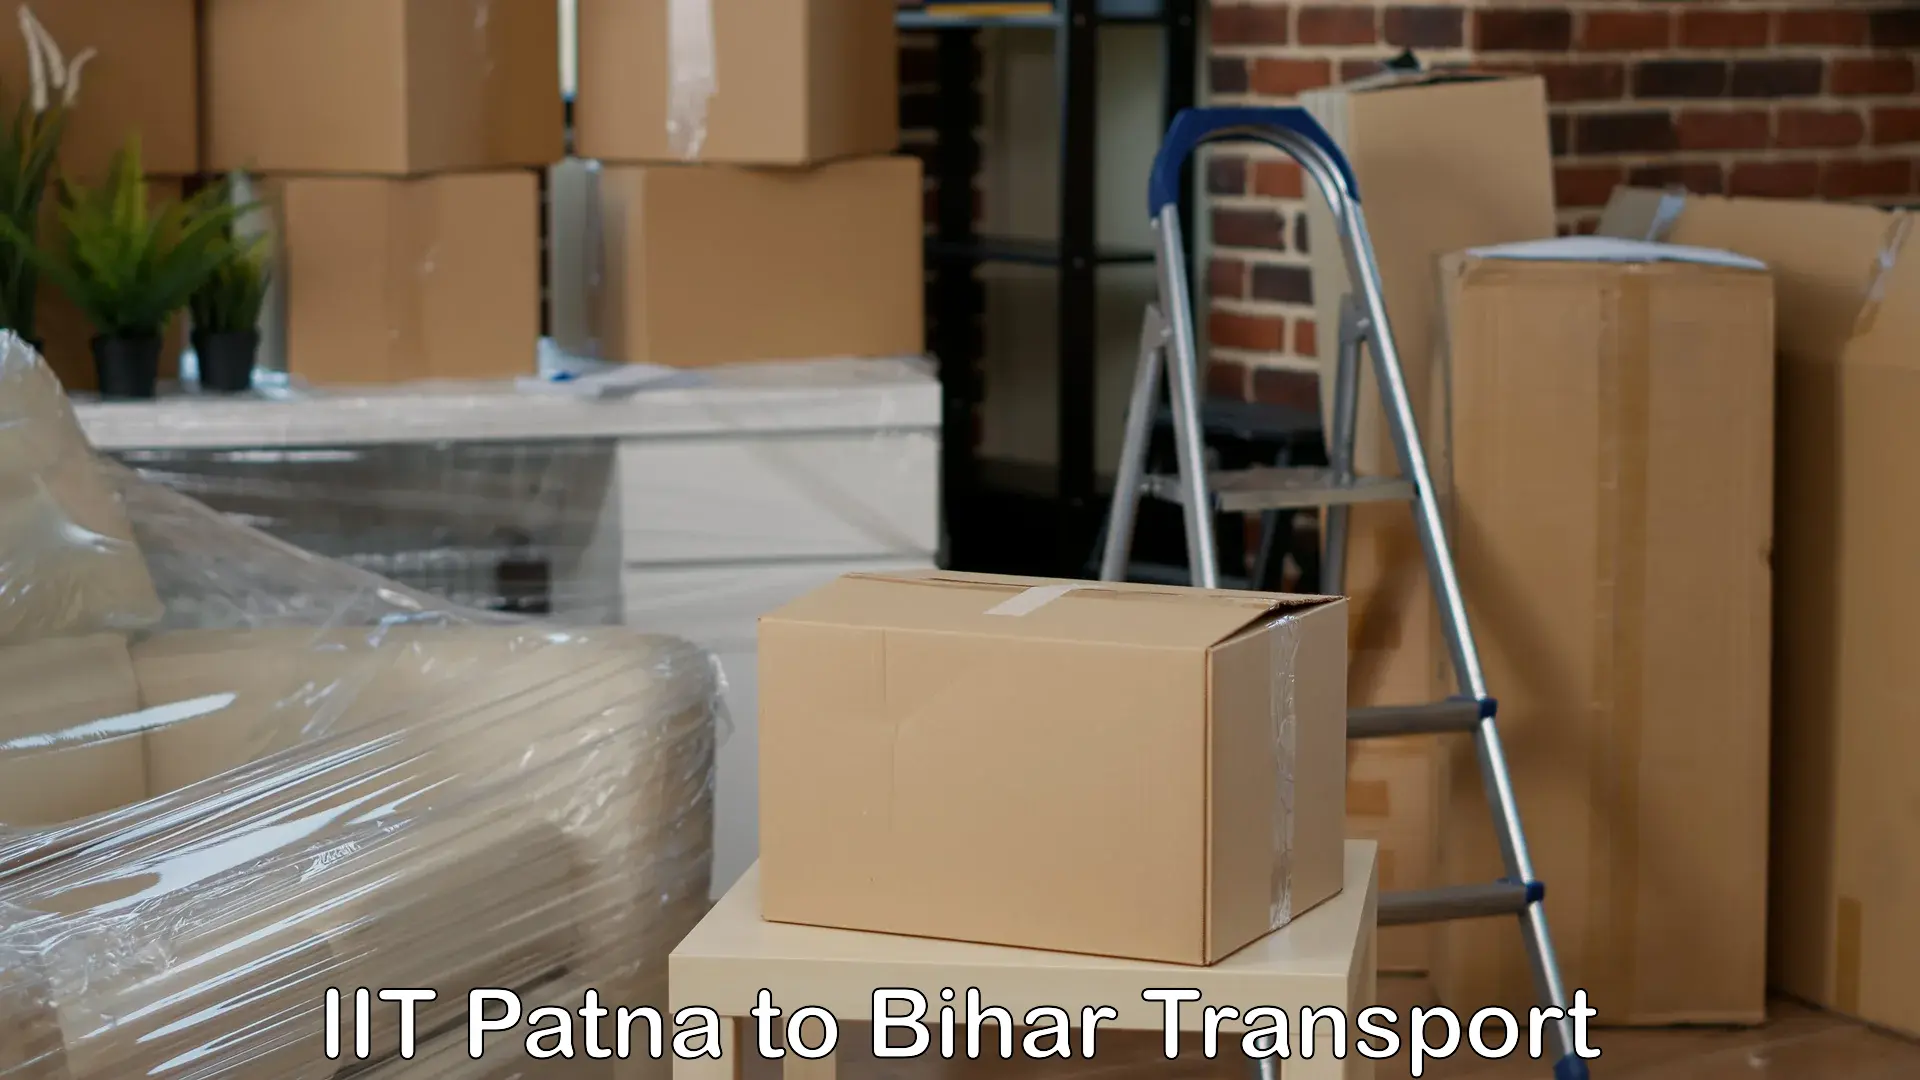 Commercial transport service IIT Patna to Birpur